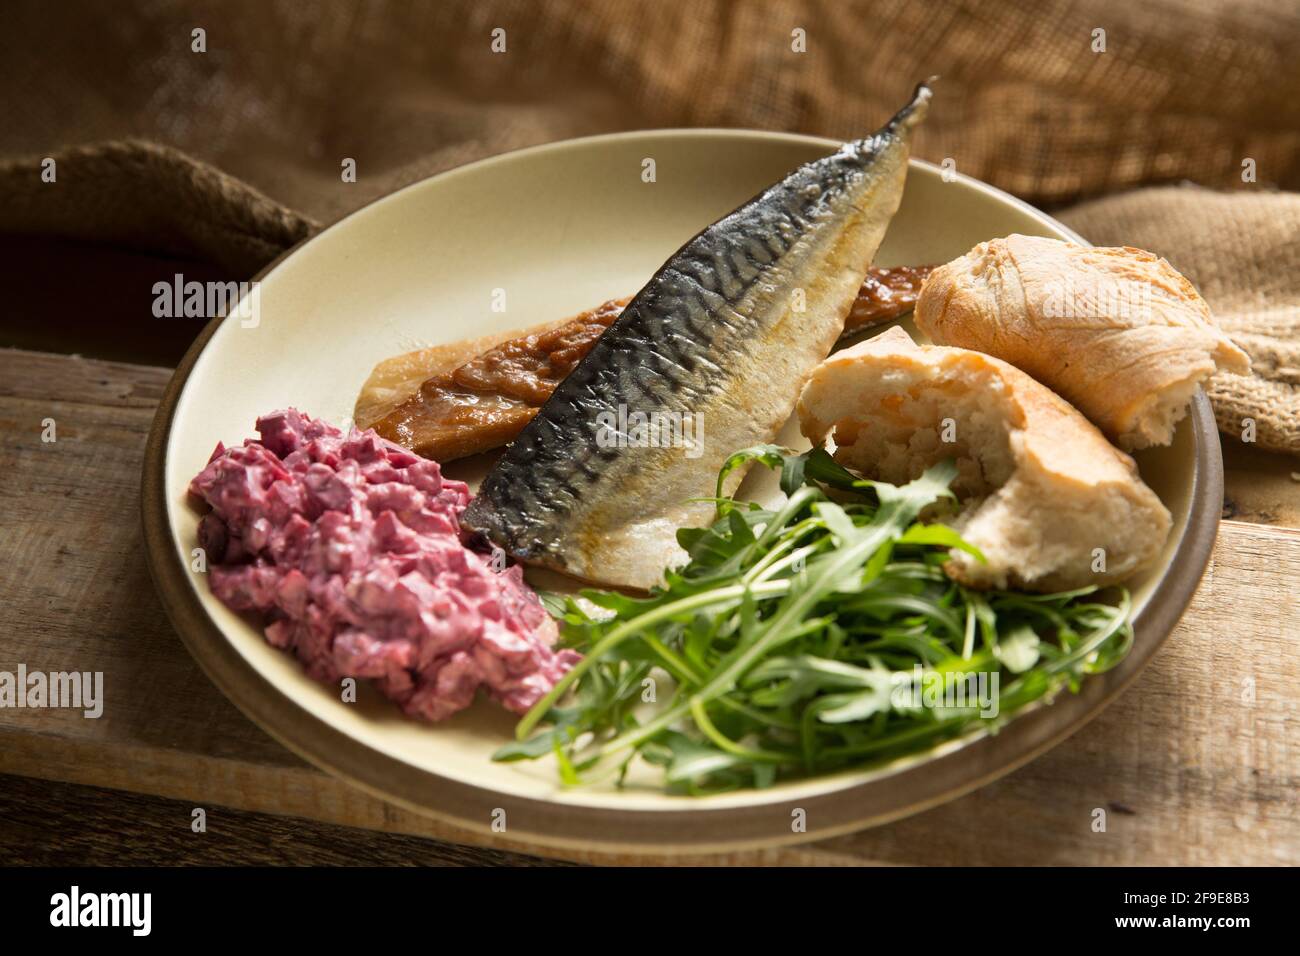 Two fillets of kiln roasted mackerel, Scomber scombrus, that have been served with a horseradish and pickled beetroot dressing, rocket salad and bread Stock Photo